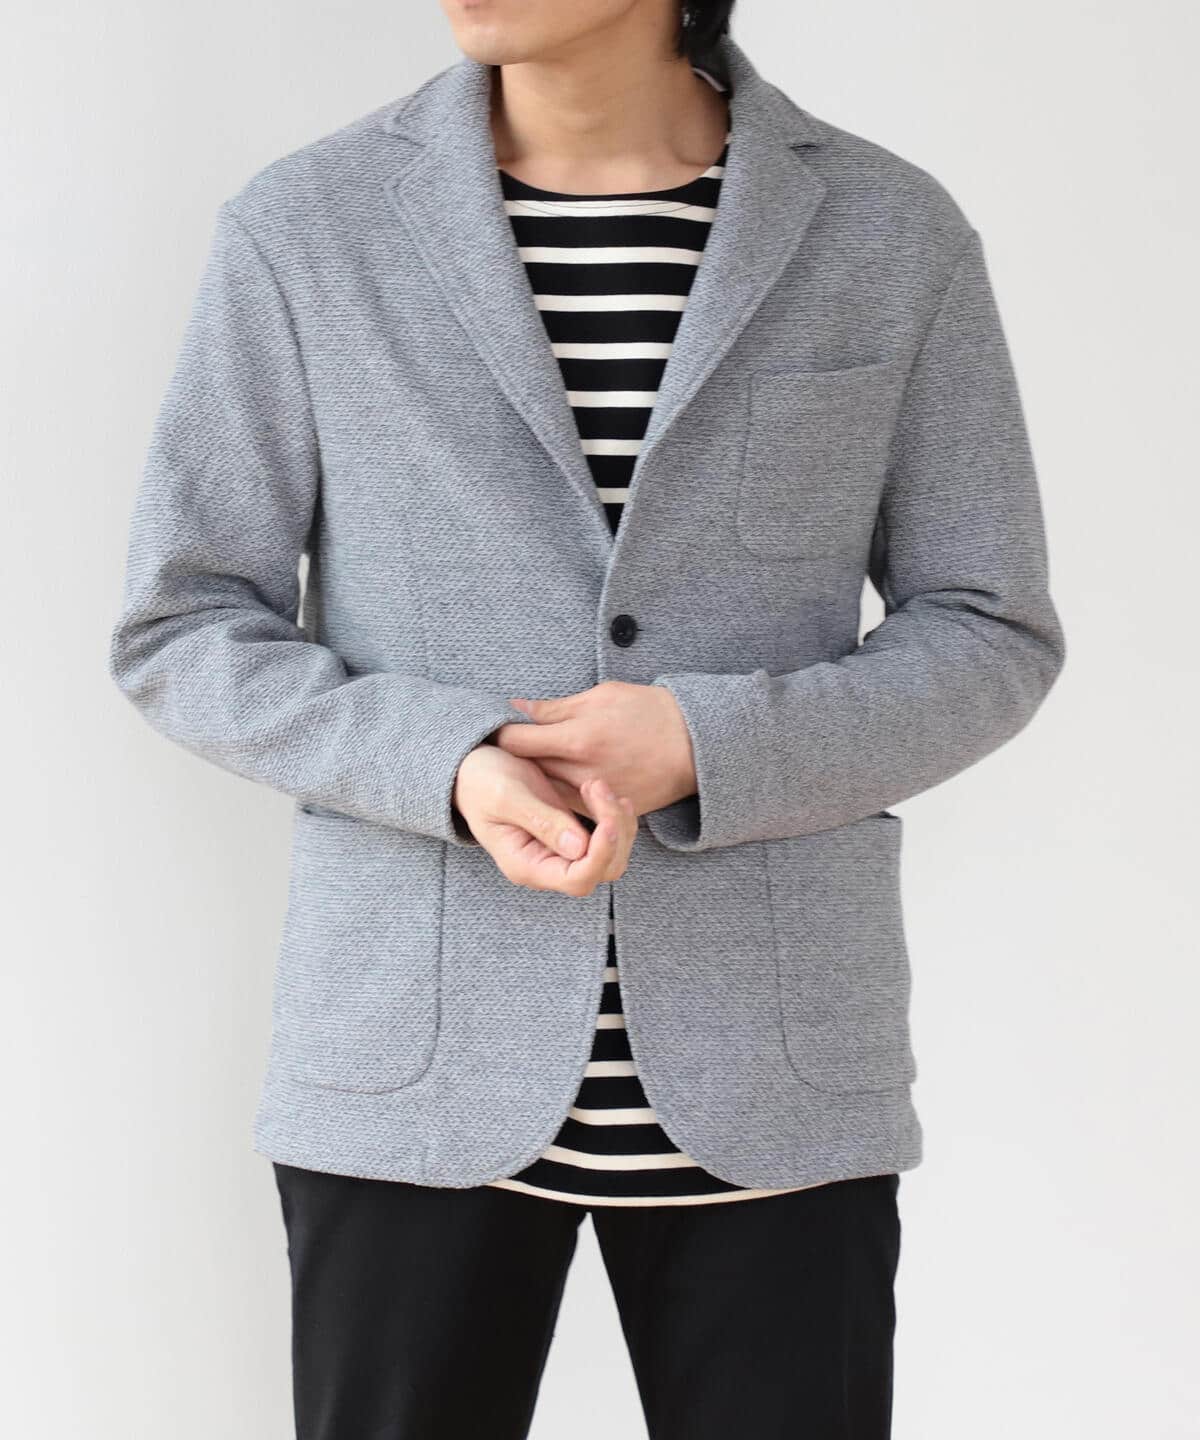 Cecil Short Sleeve Knitted Jacket light grey flecked casual look Fashion Knitwear Short Sleeve Knitted Jackets 